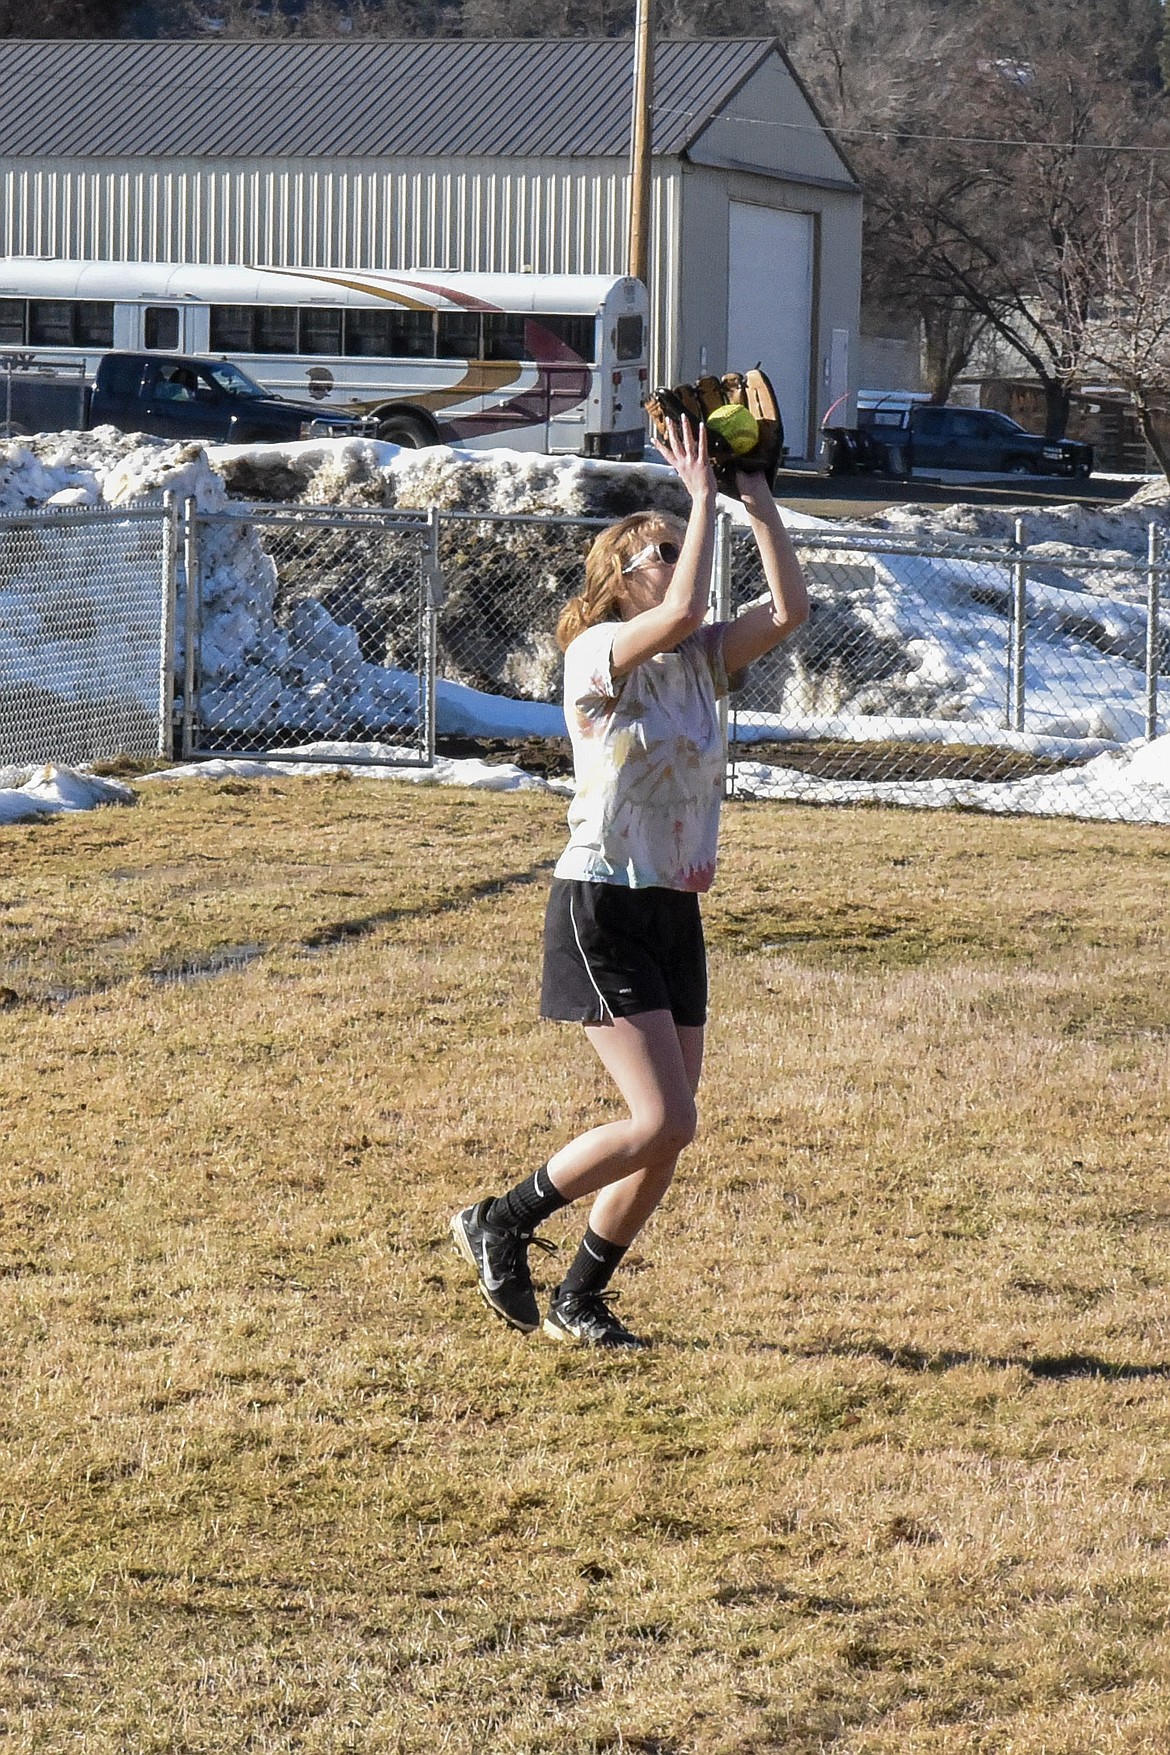 Troy senior Annie Day makes a catch during fielding practice at the Troy practice field March 18. (Ben Kibbey/The Western News)